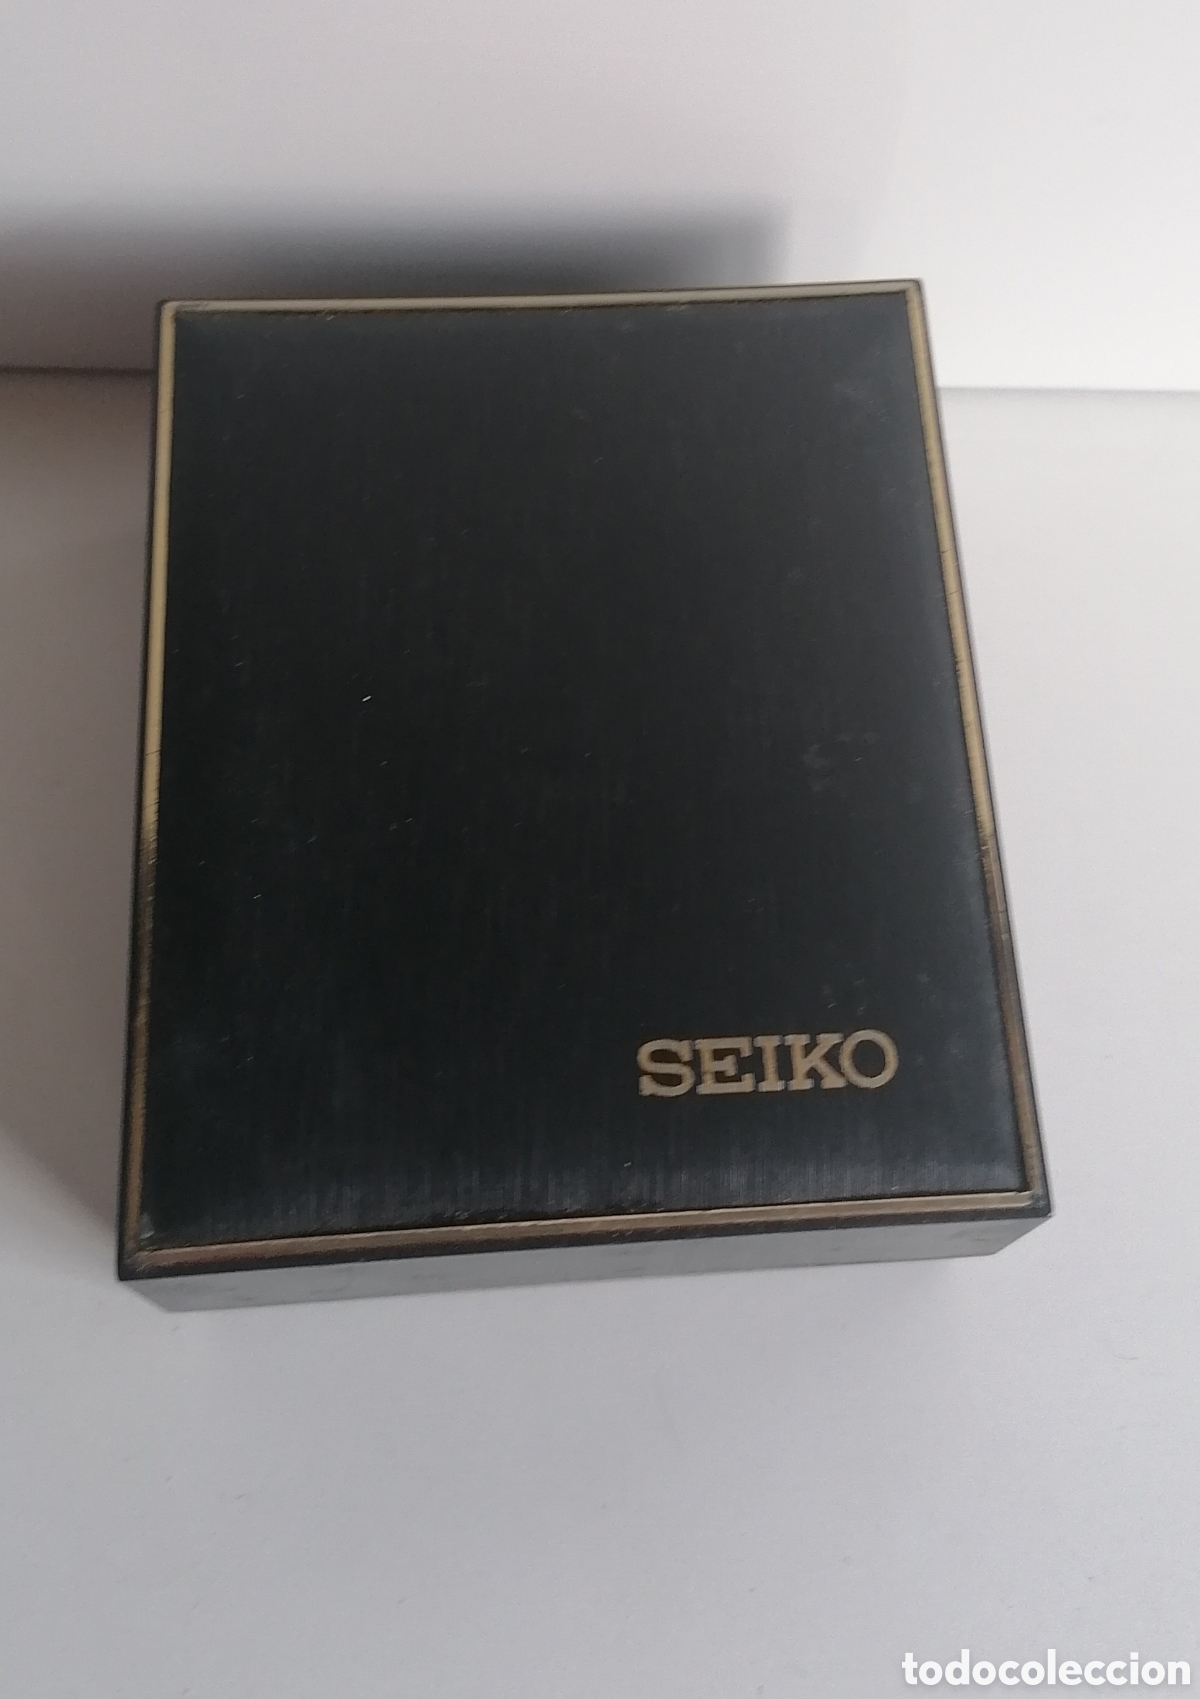 seiko - a966-4000 utt-once 1984 - Buy Vintage watches and clocks on  todocoleccion